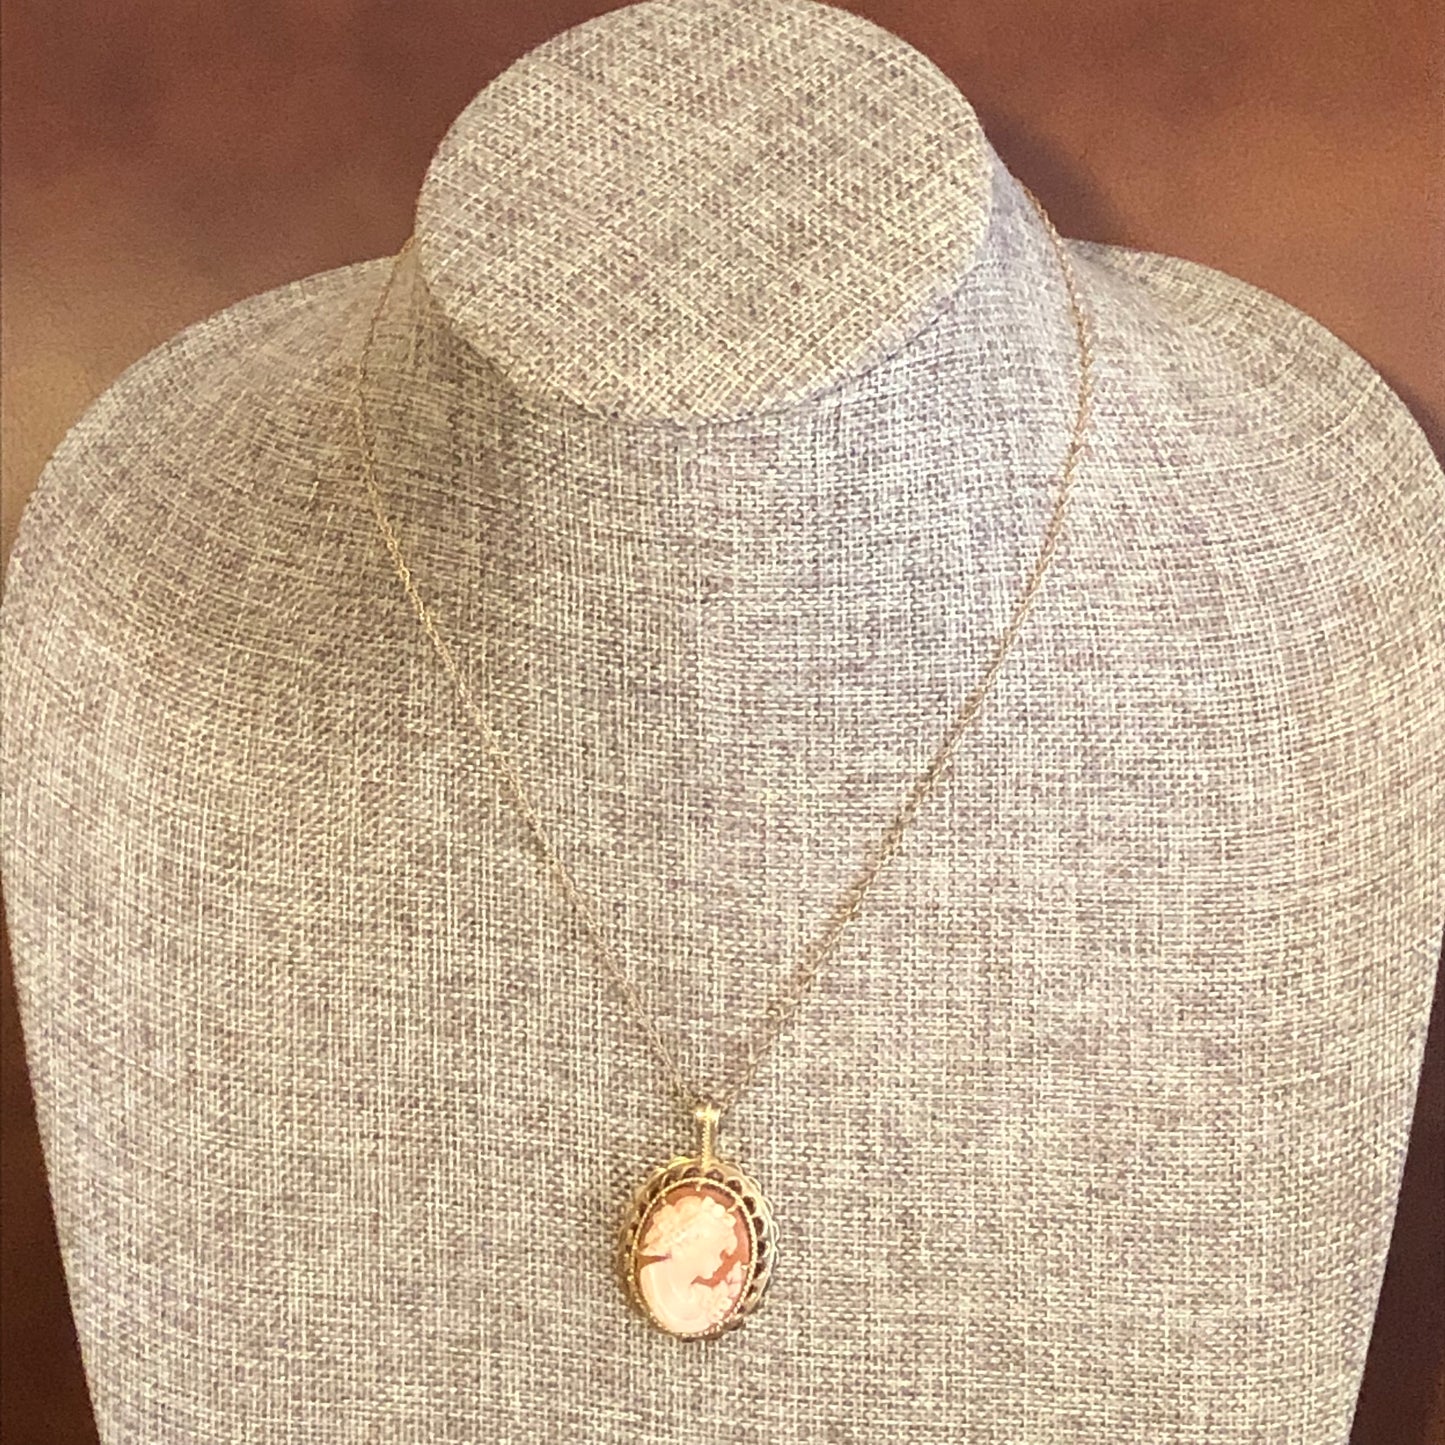 14k Gold Cameo Pendant with Chain